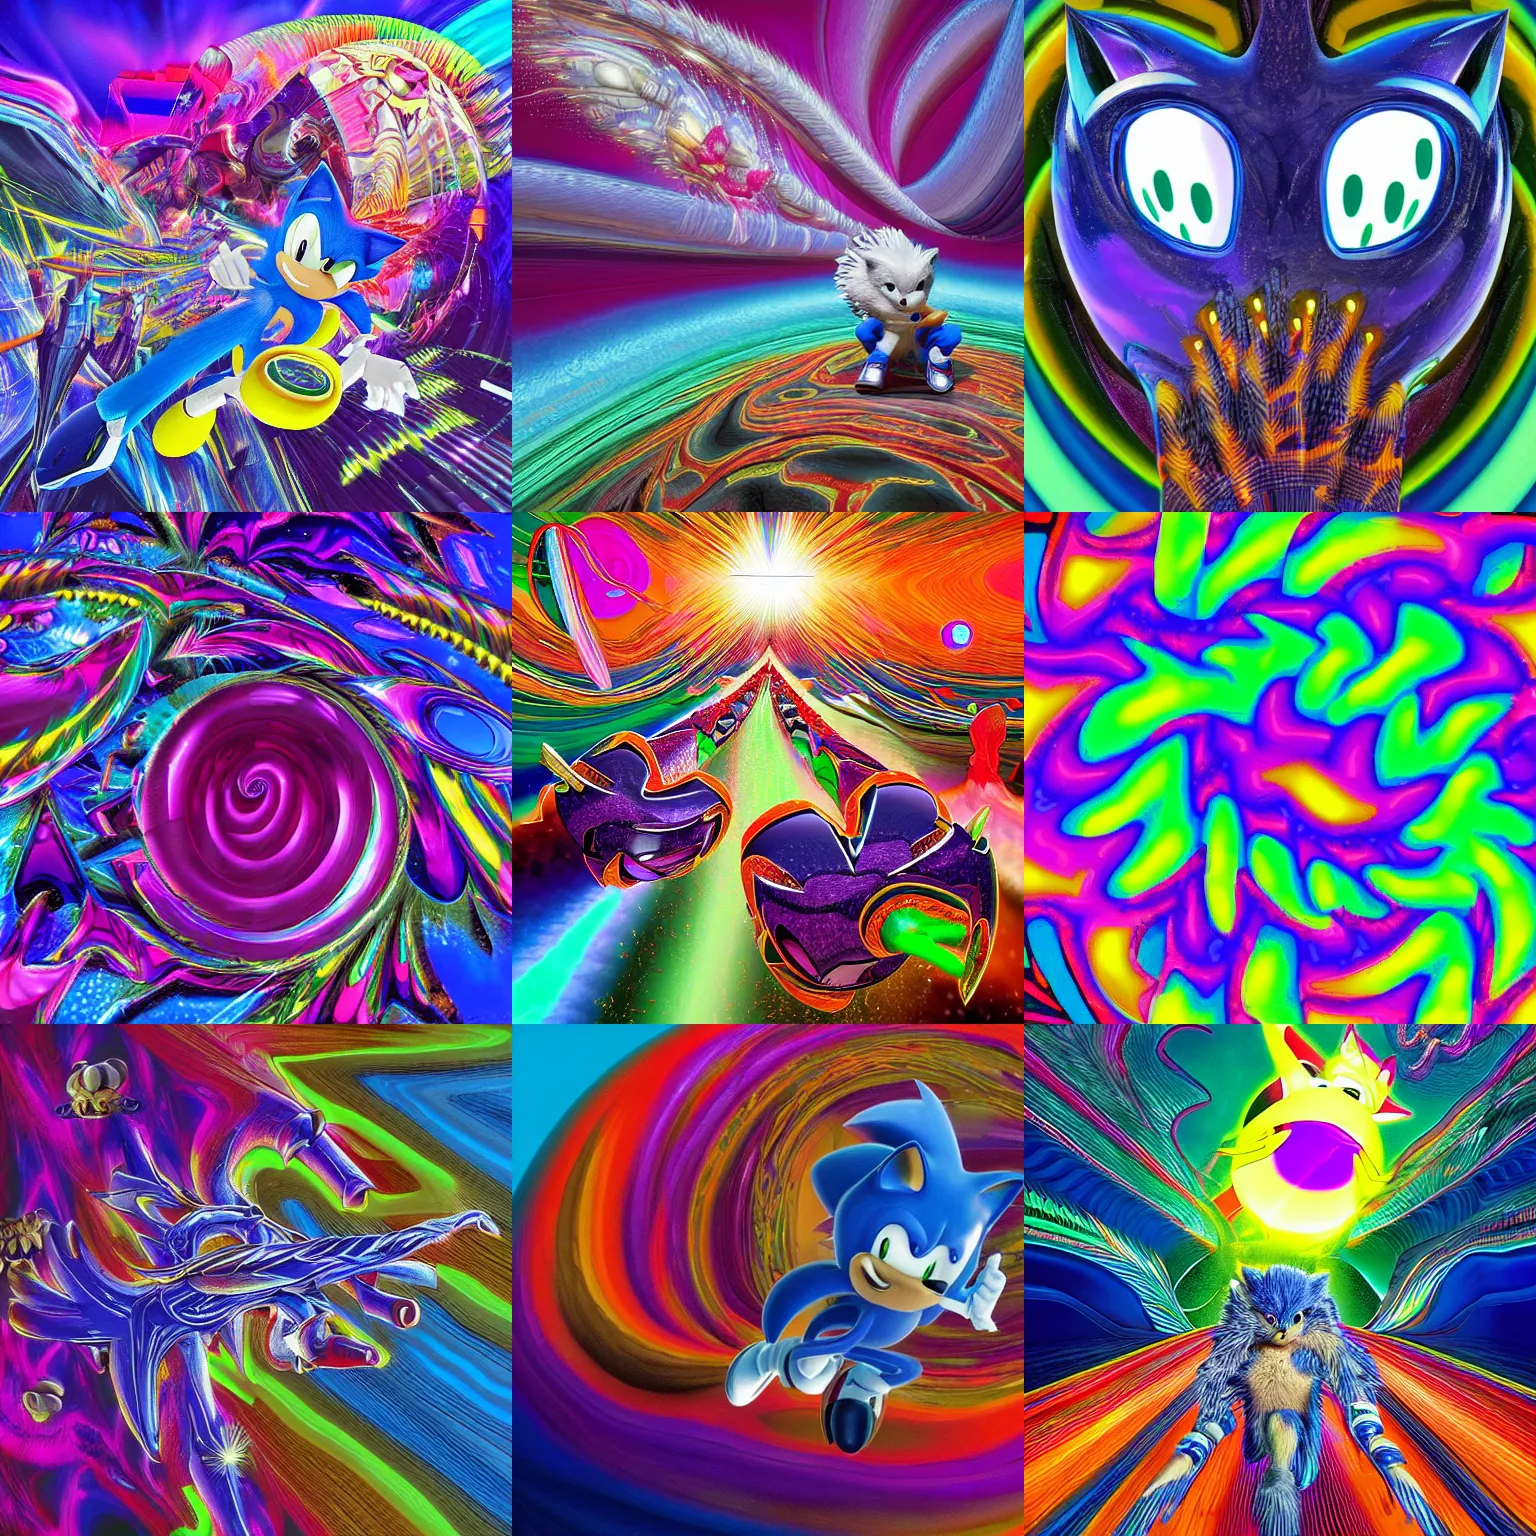 Prompt: sonic the hedgehog in surreal, recursive fractals, sharp, detailed professional, high quality portrait sonic airbrush art MGMT tame impala album cover portrait of a liquid dissolving LSD DMT sonic the hedgehog surfing through cyberspace, purple checkerboard background, 1990s 1992 Sega Genesis video game album cover